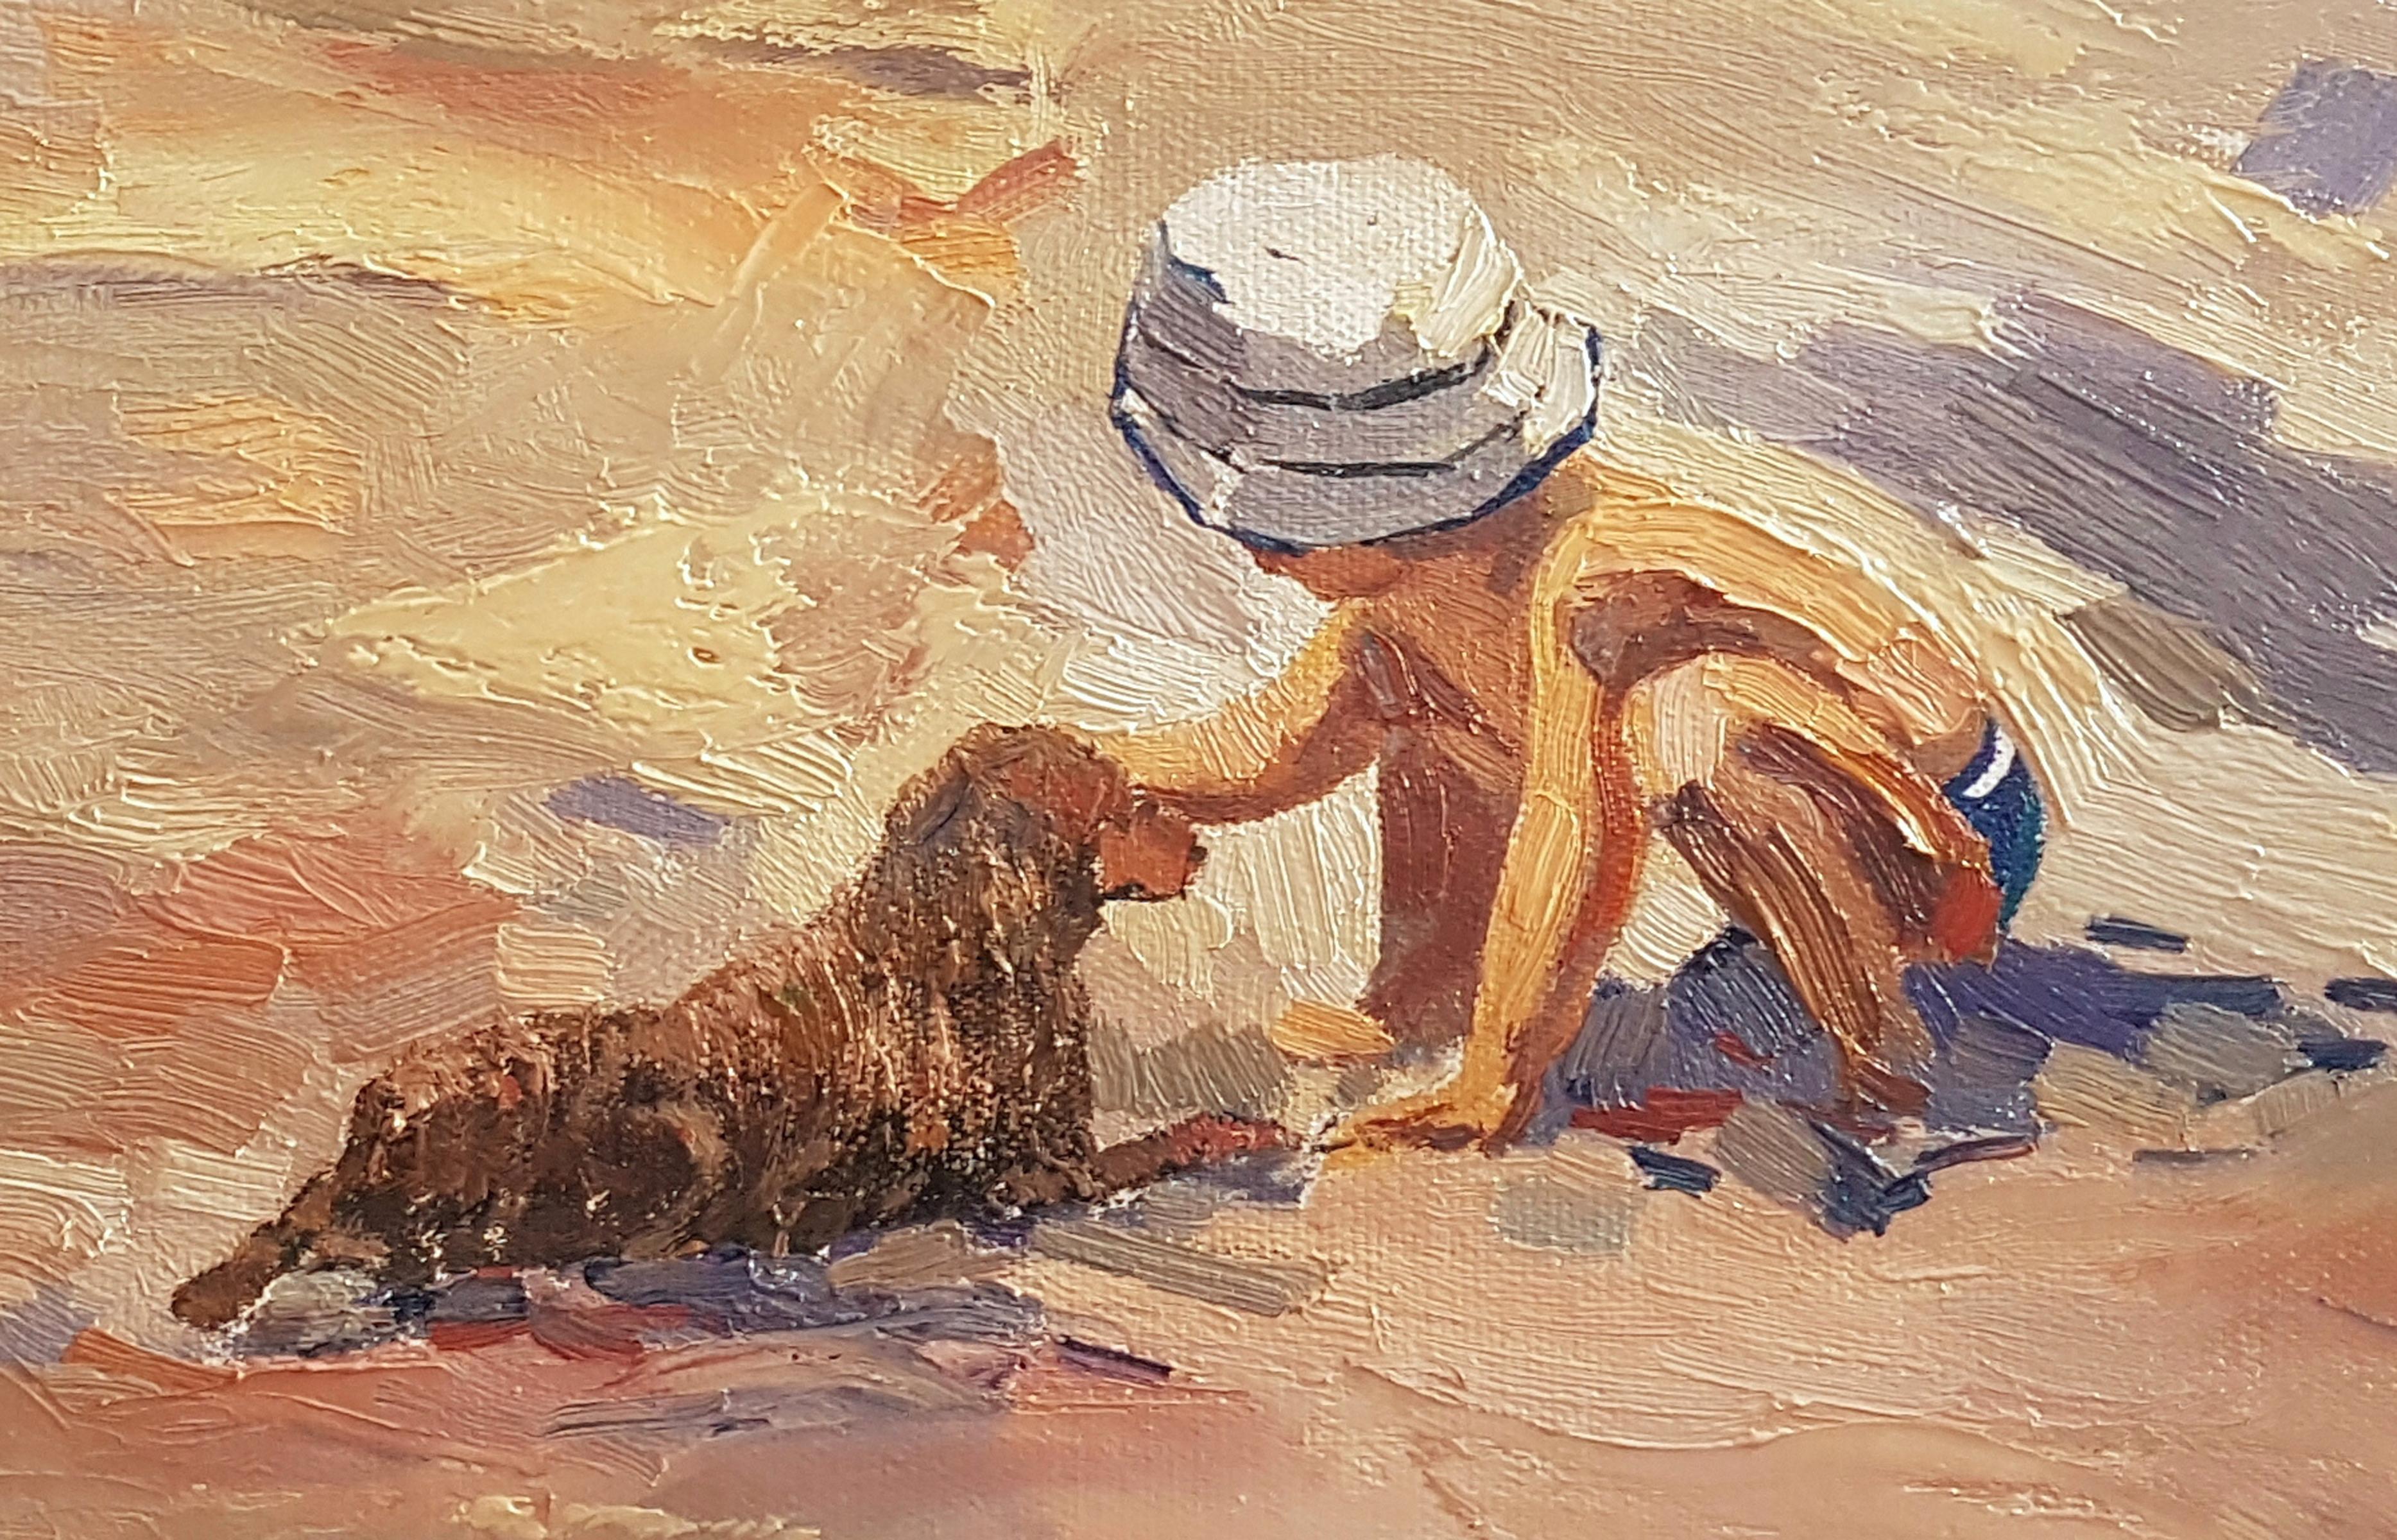 Fun Day, Coastal, Beach, Figurative, Original oil Painting, One of a Kind - Brown Landscape Painting by Ara H. Hakobyan